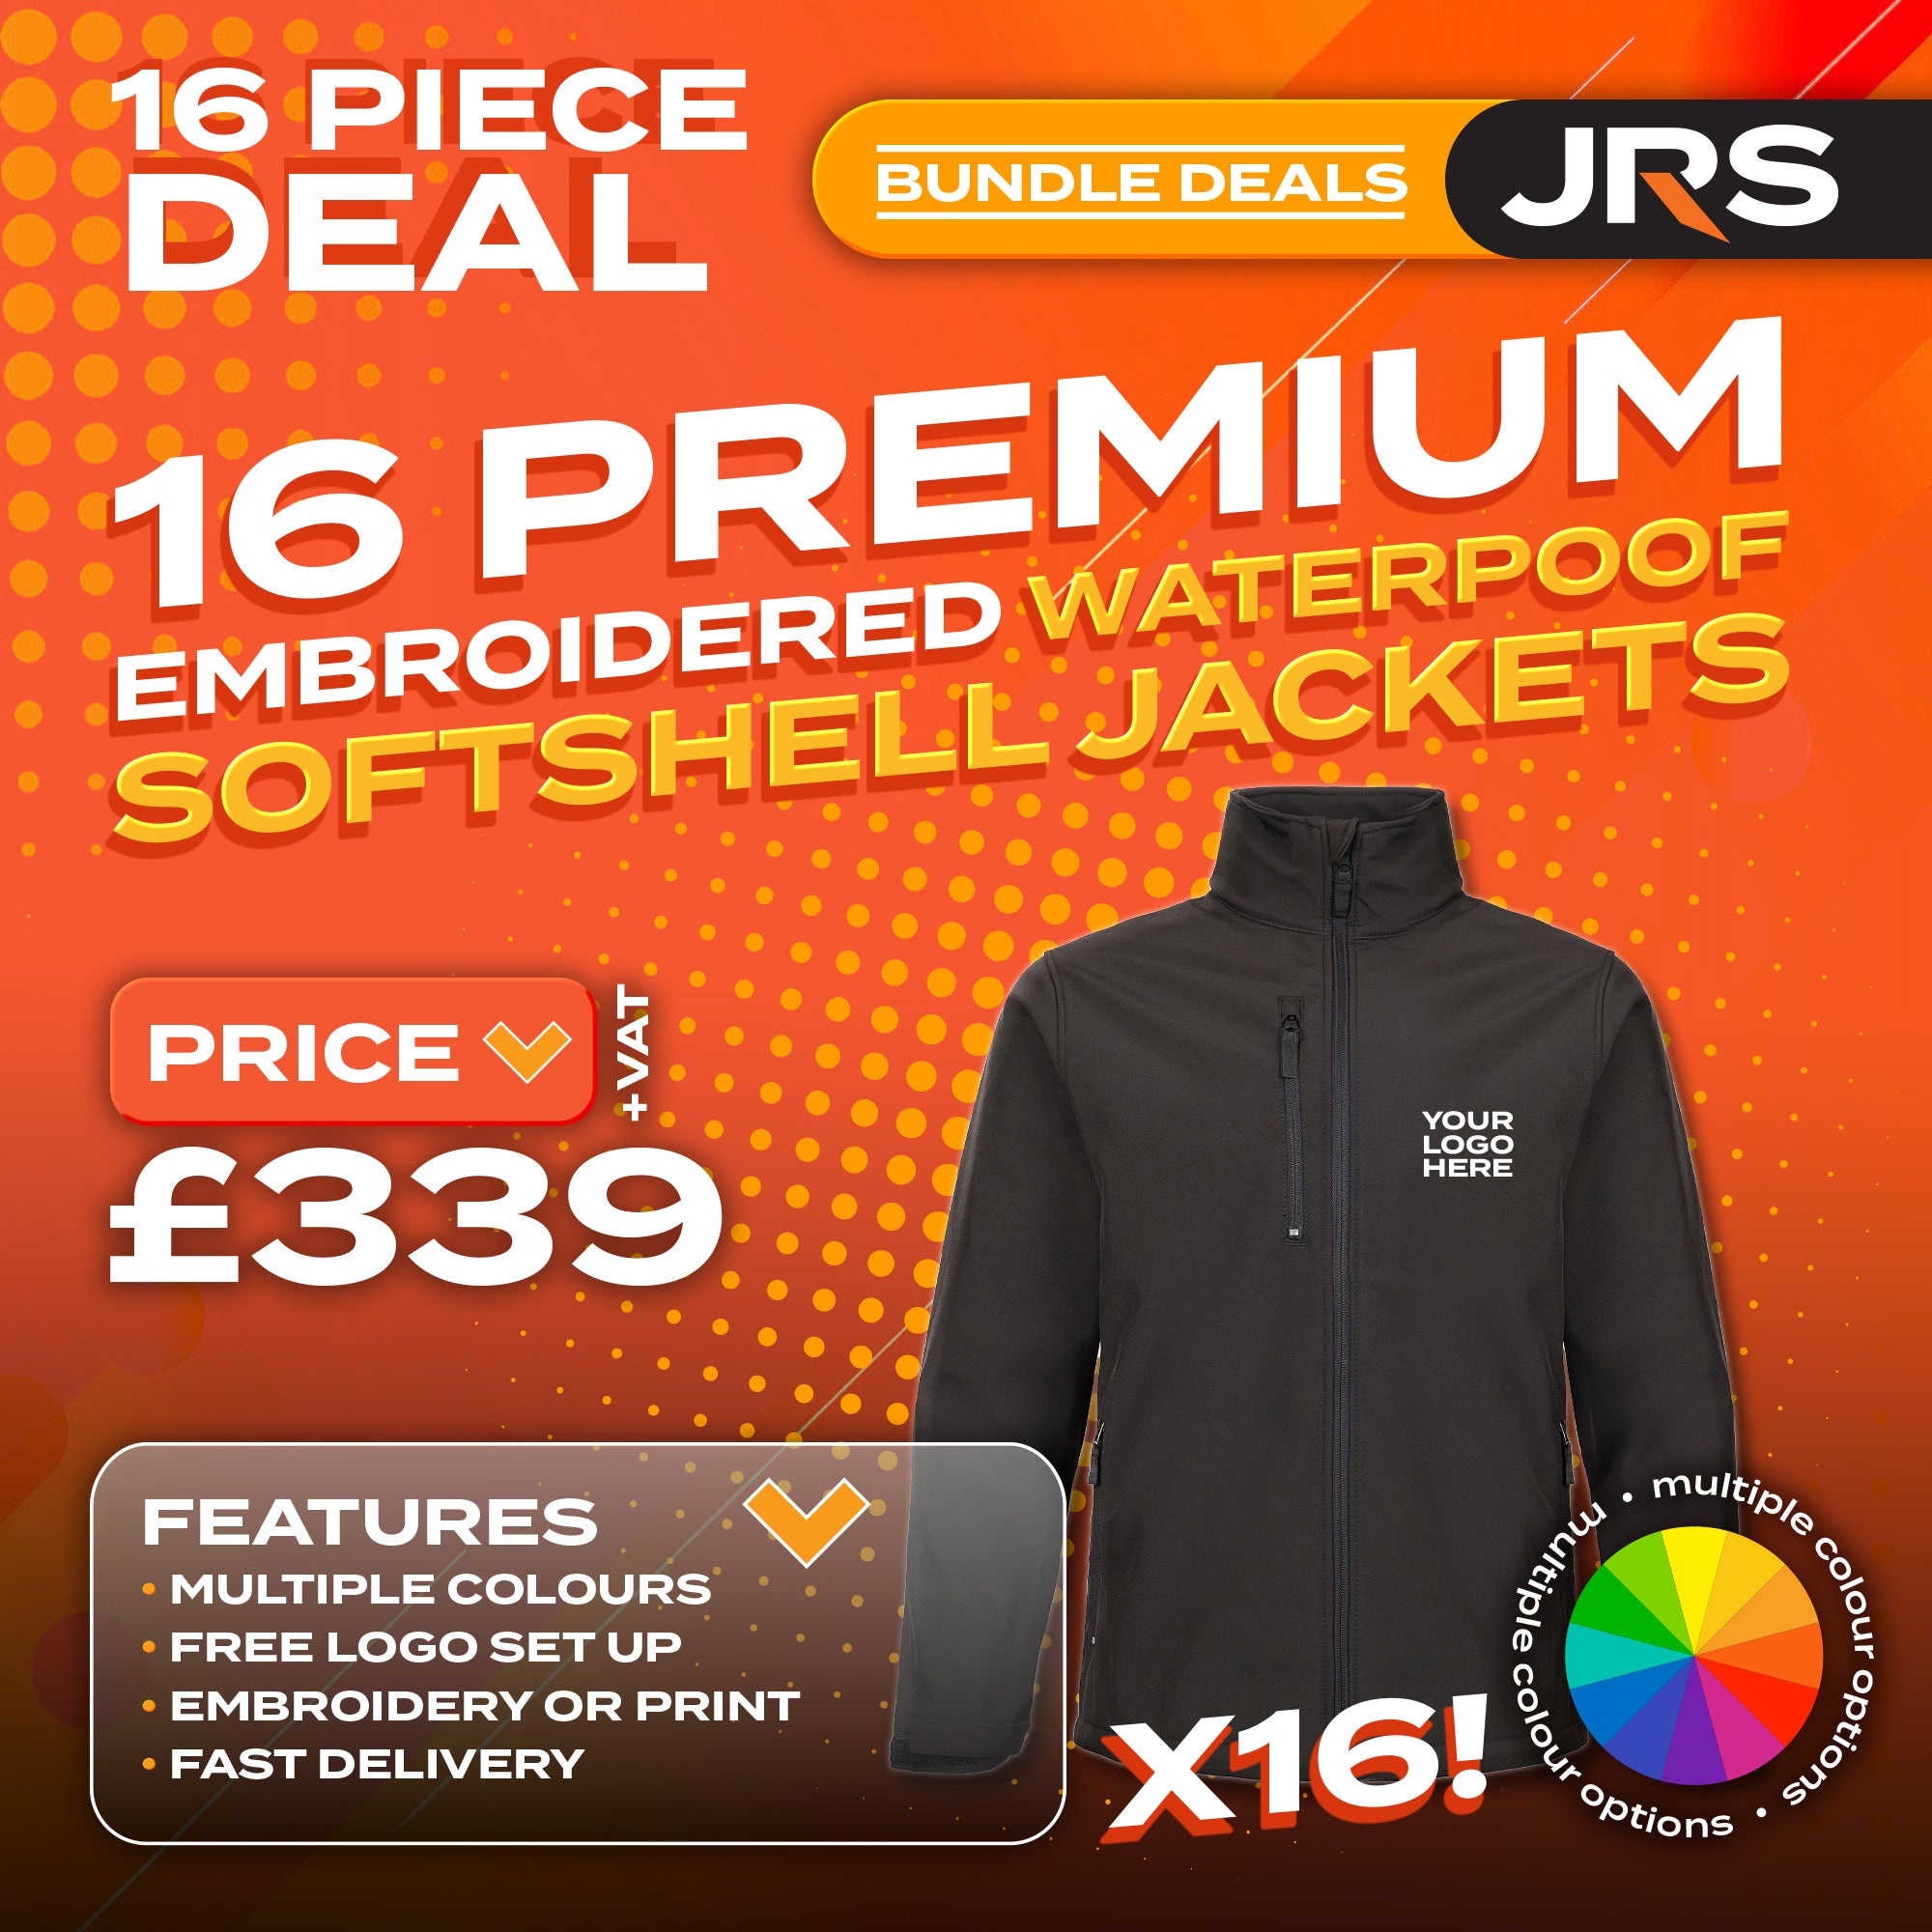 16x Embroidered Waterpoof Softshell Jackets Bundle Deal